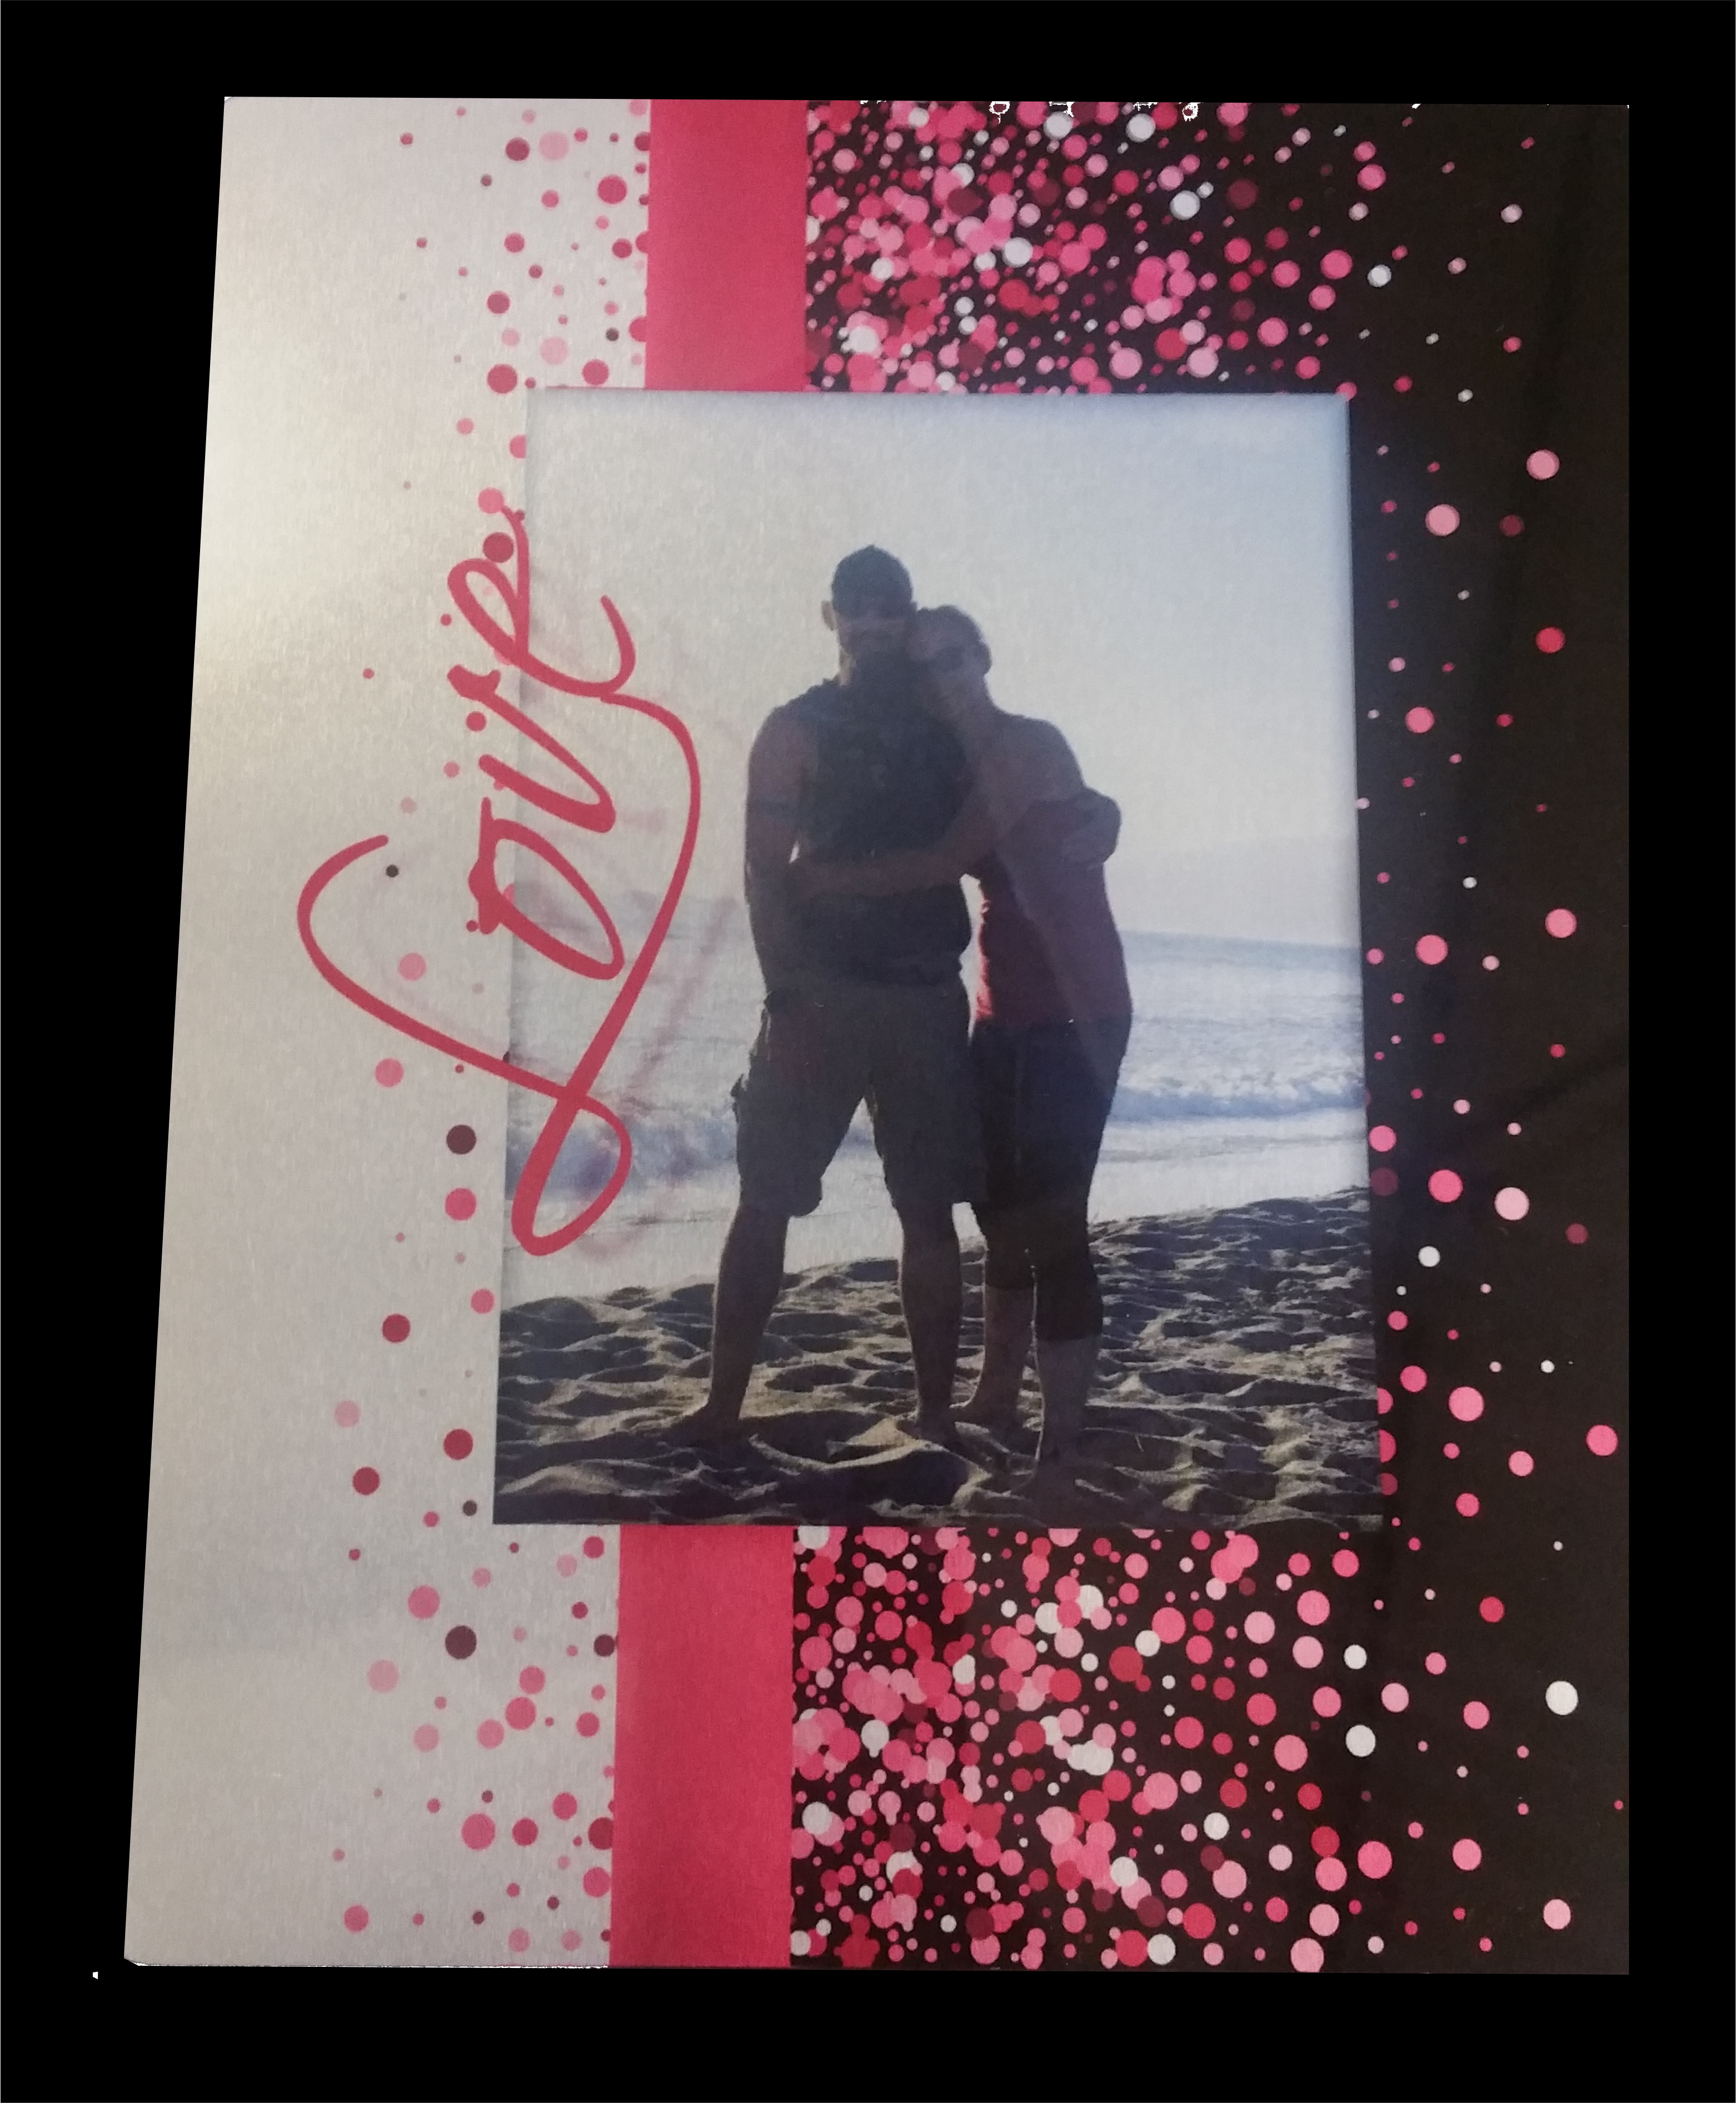 Love Photo Panel made with sublimation printing